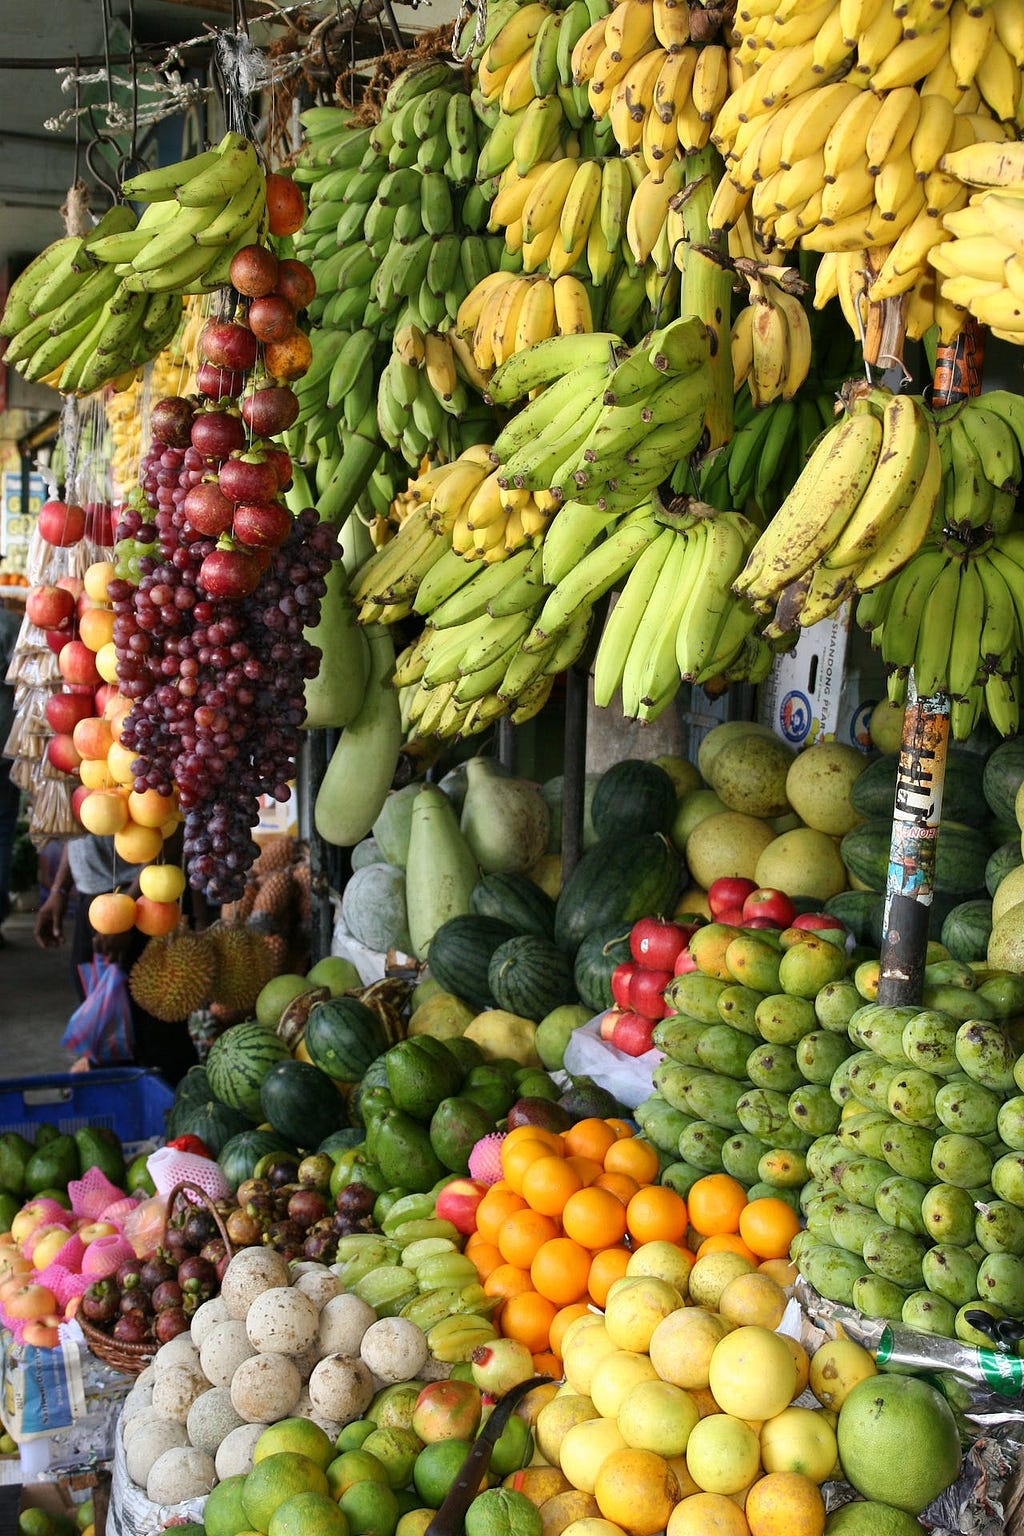 A display of tropical fruits